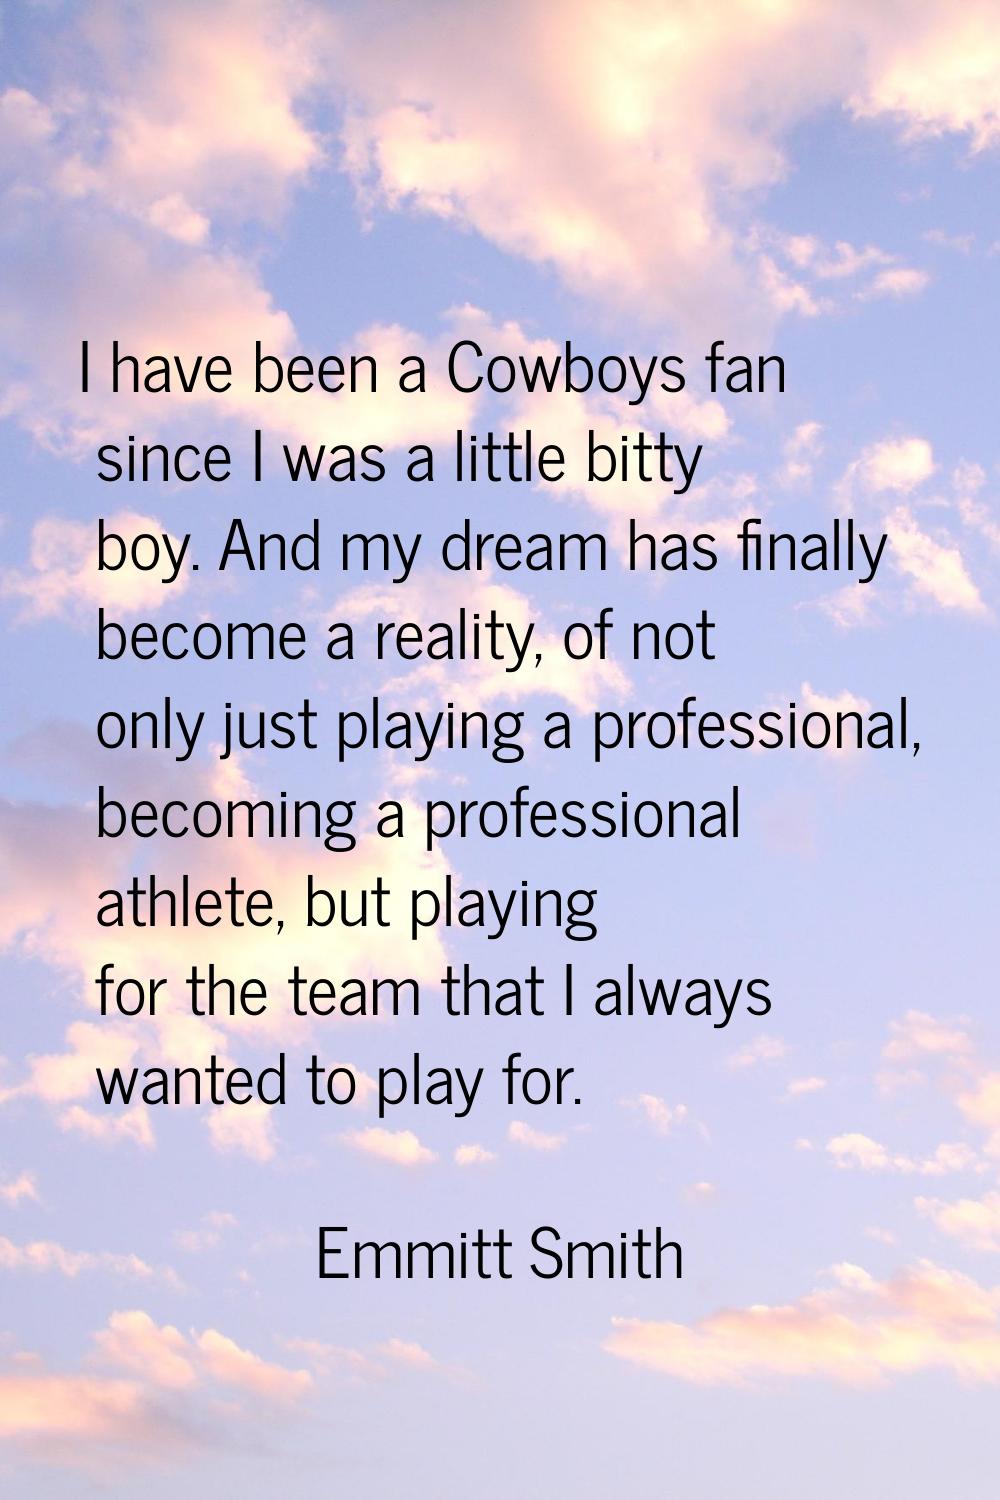 I have been a Cowboys fan since I was a little bitty boy. And my dream has finally become a reality